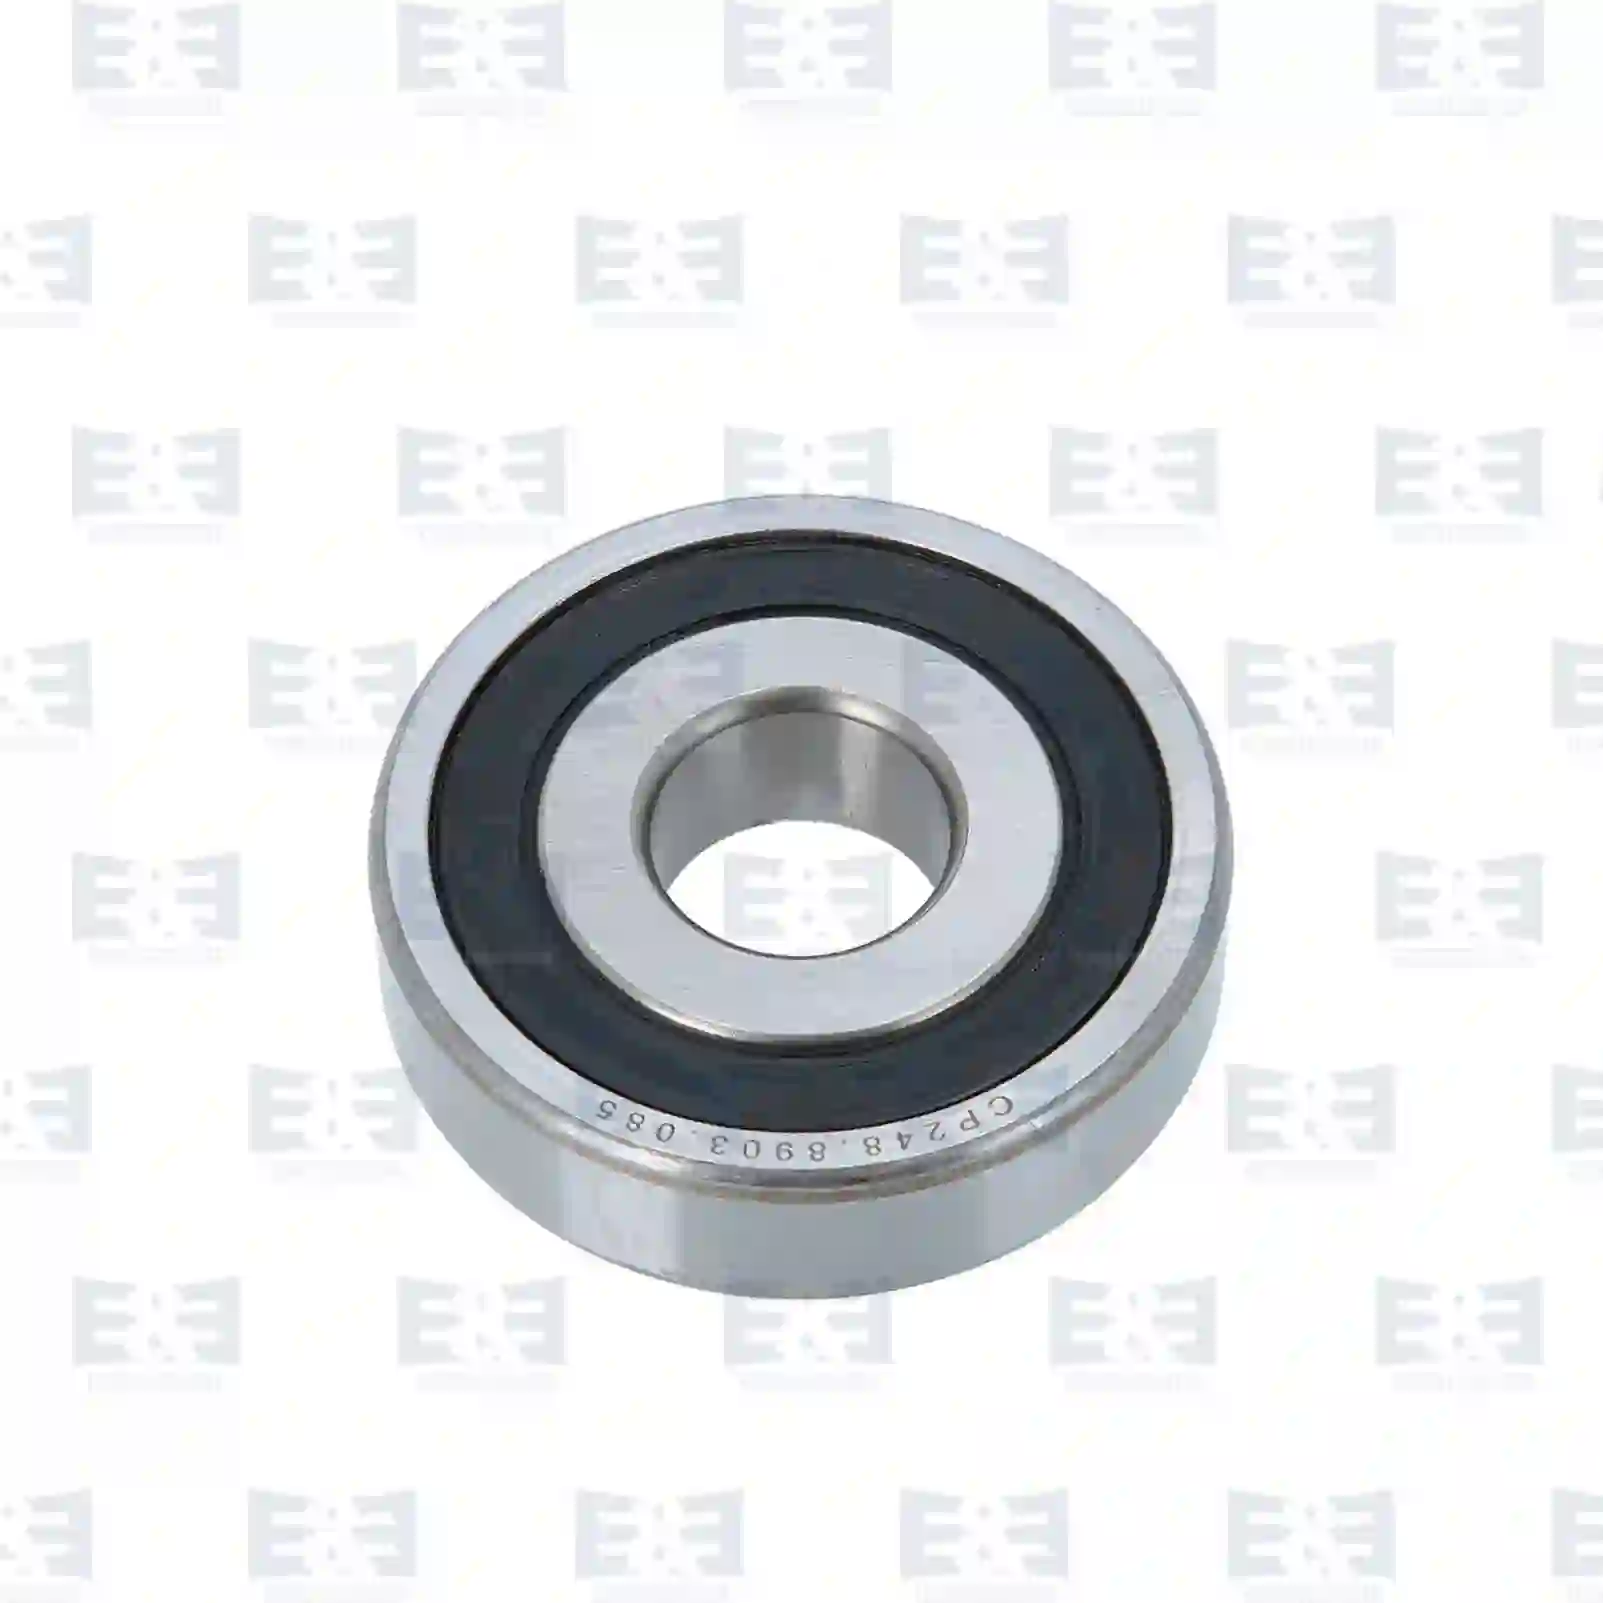  Ball bearing || E&E Truck Spare Parts | Truck Spare Parts, Auotomotive Spare Parts